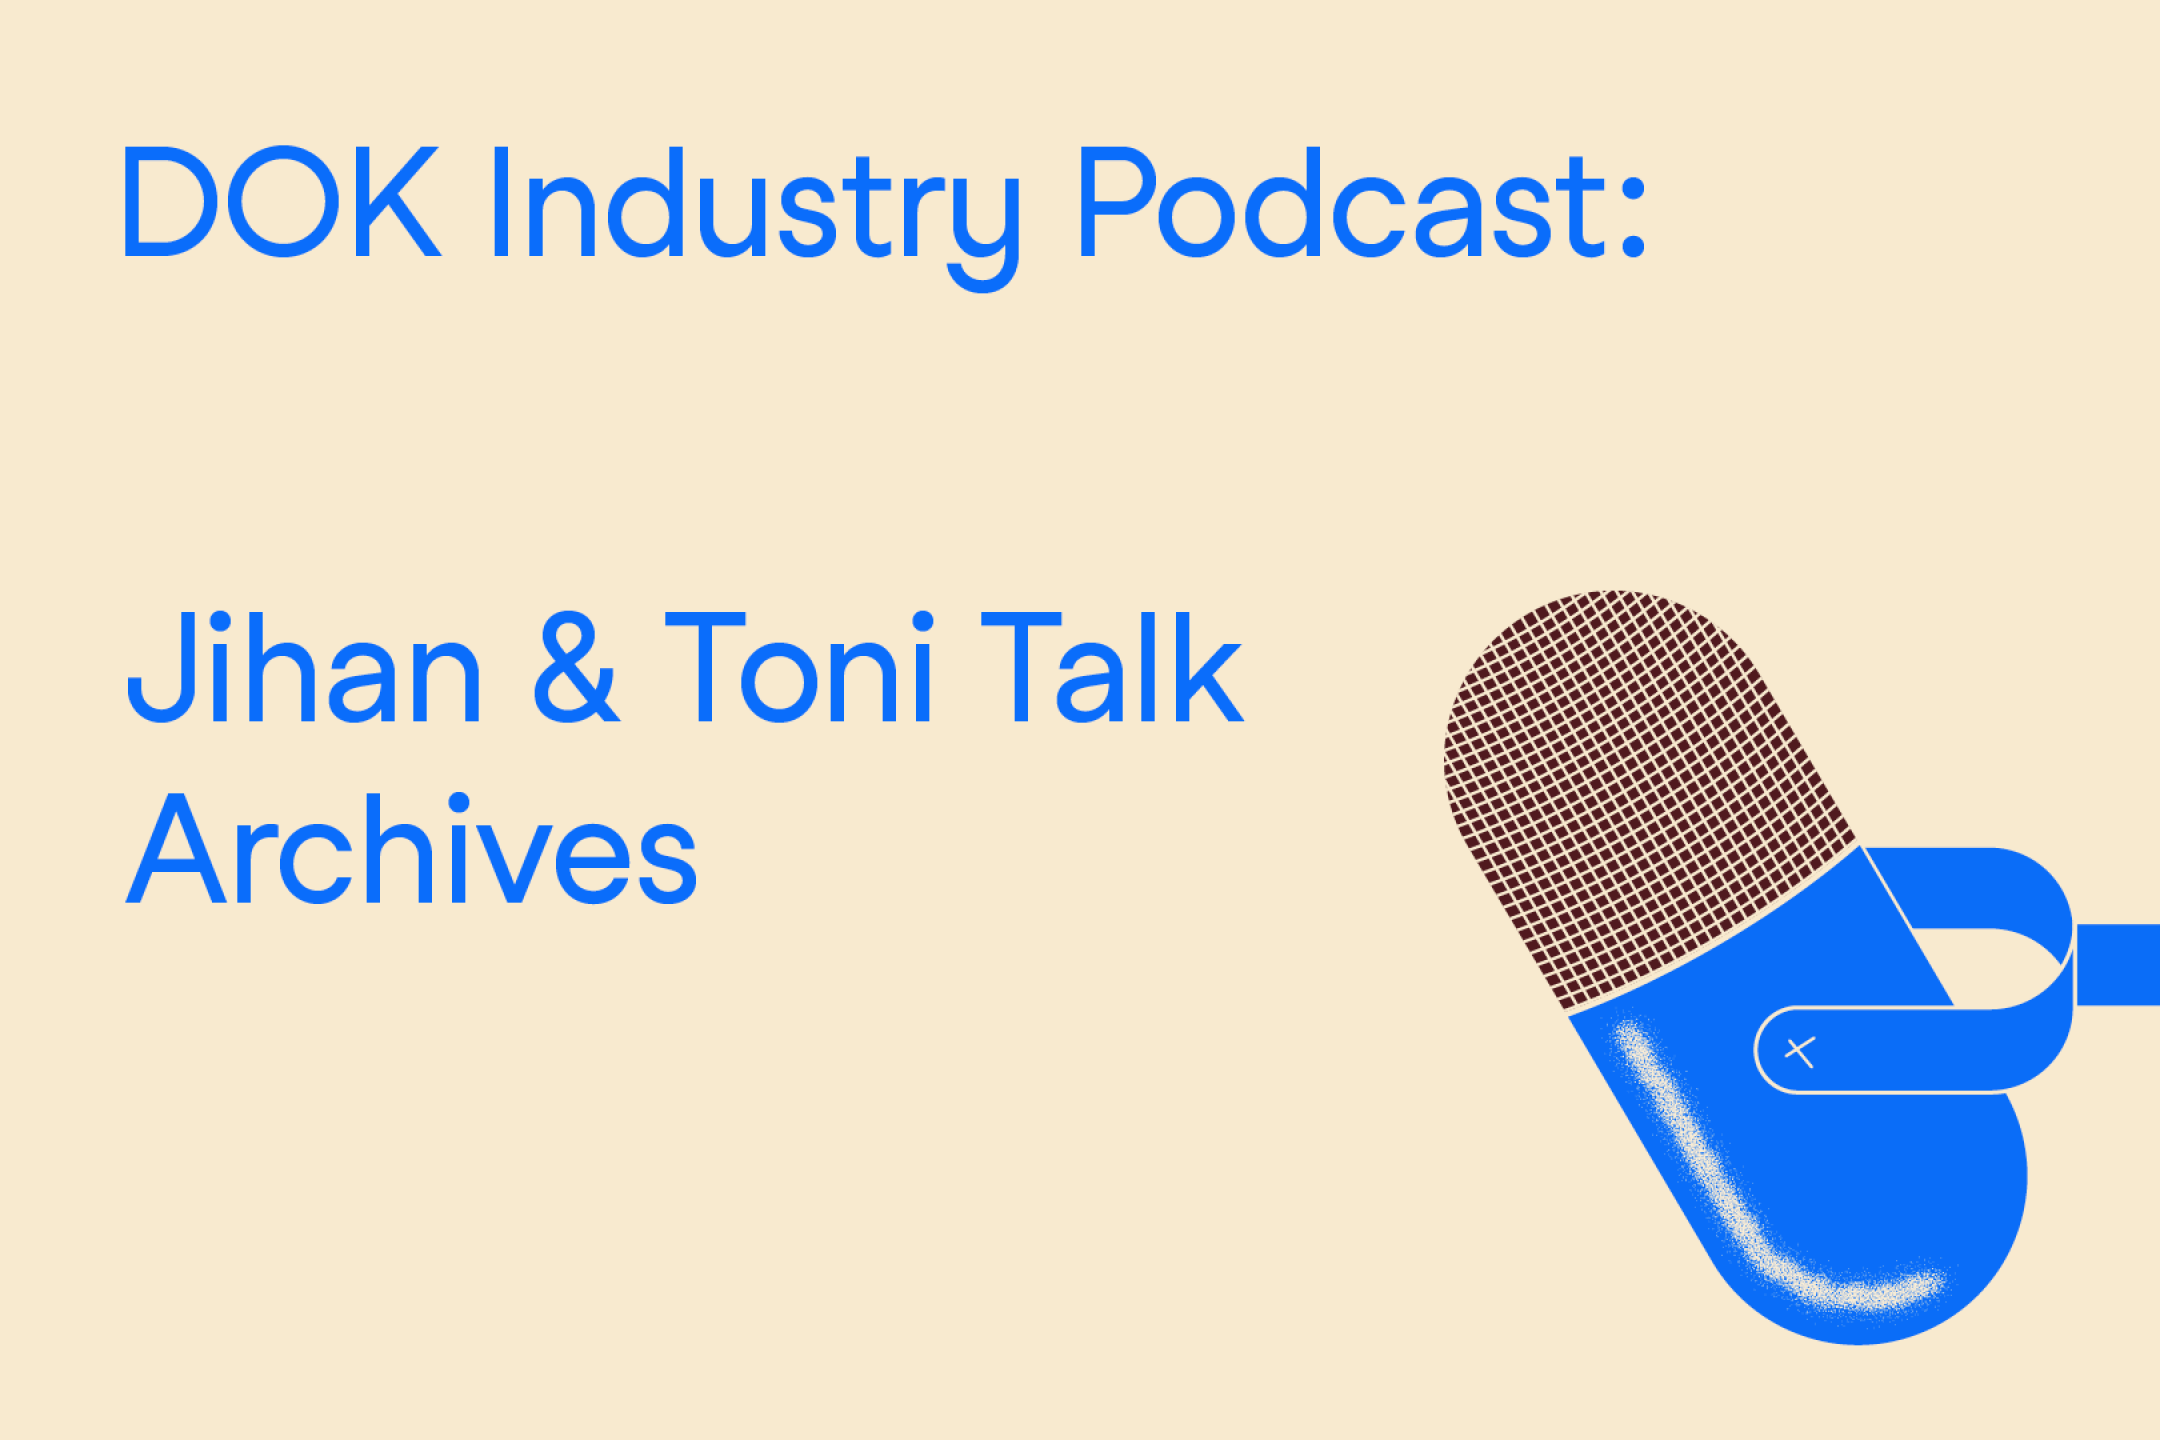 A text graphic with blue letters on a yellow background. At the right the illustration of a microphone. At the left the text: “Dok Industry Podcast: Jihan & Toni Talk Archives”